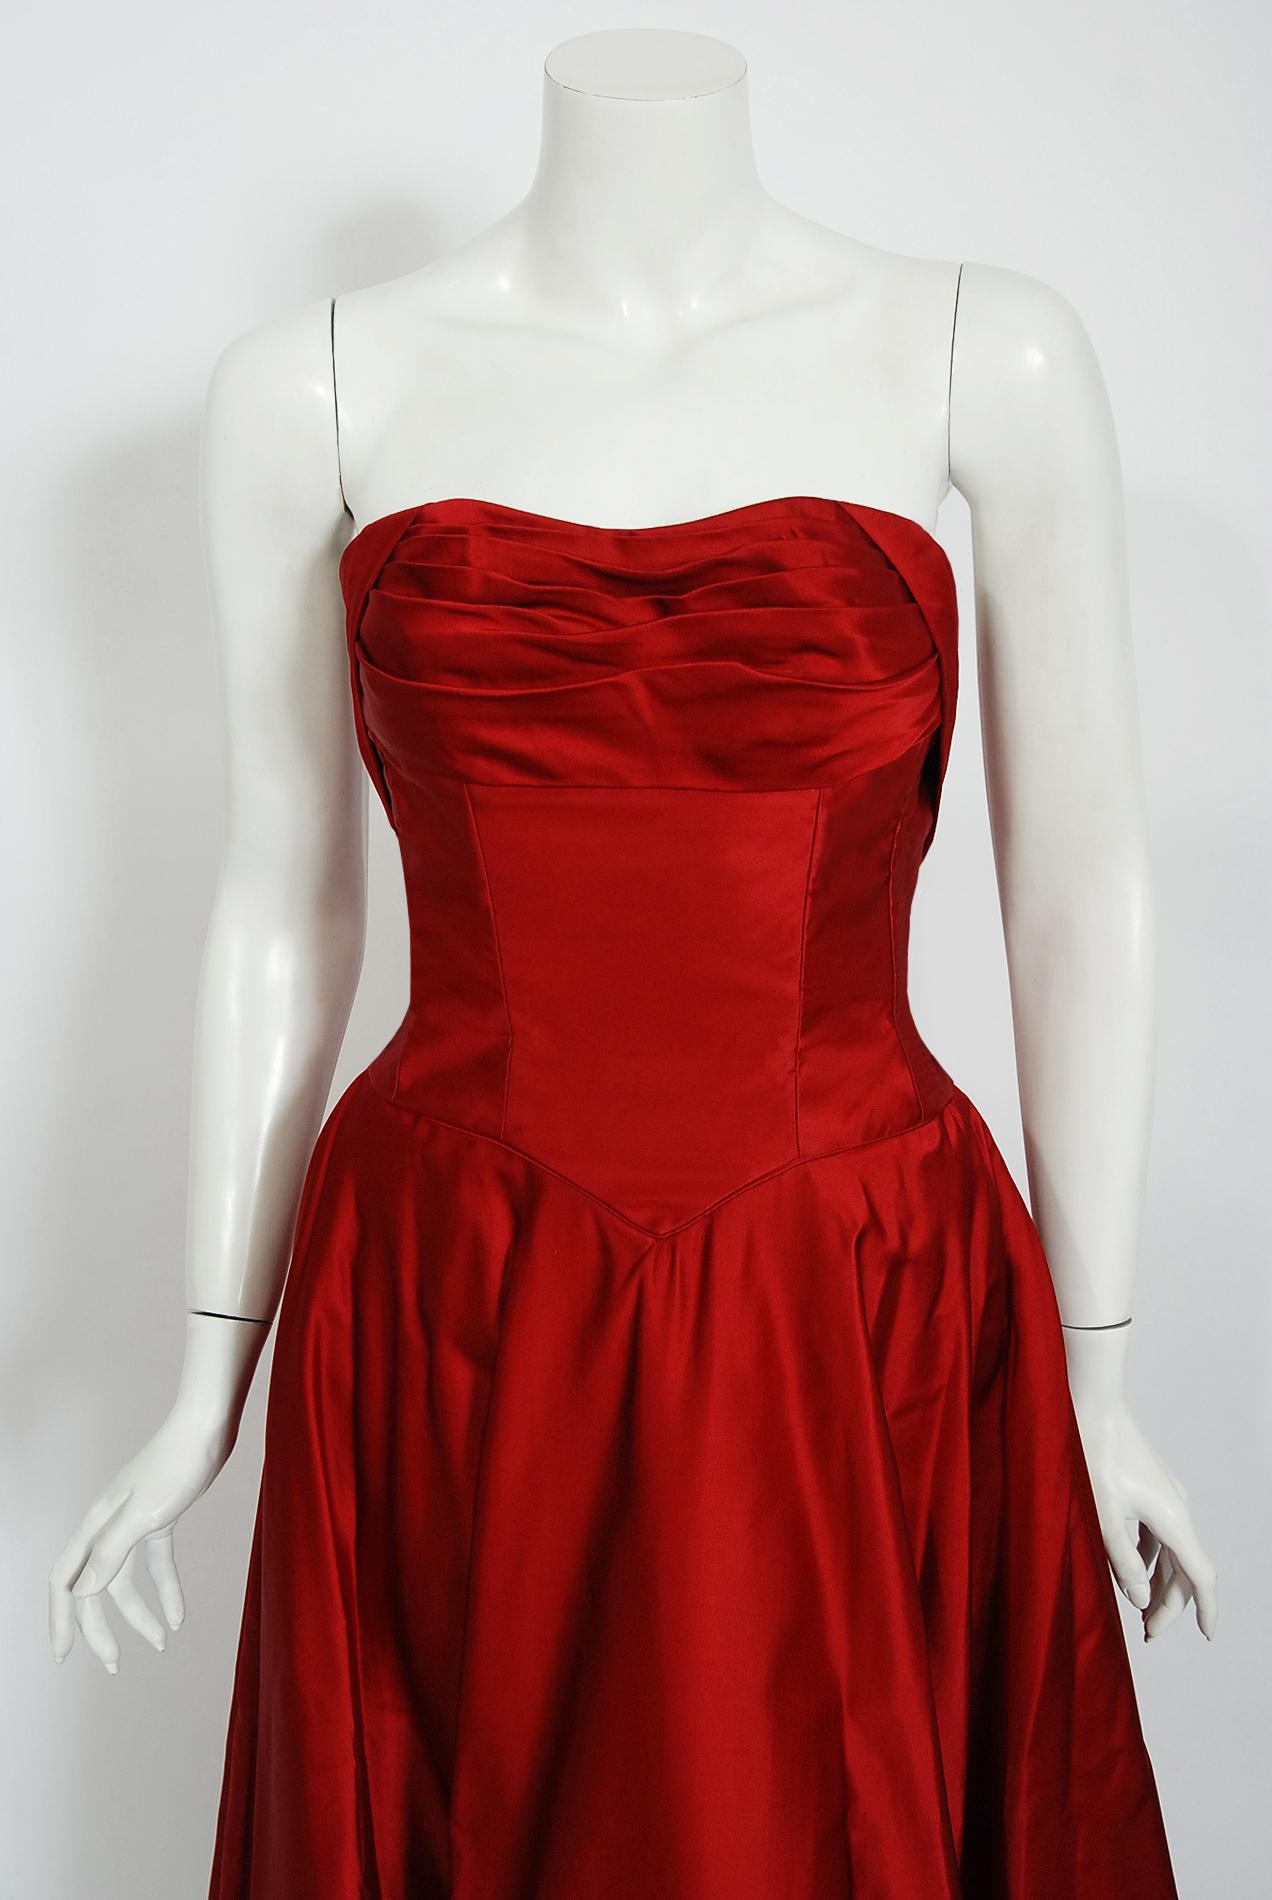 This is such a seductive and dramatic formal gown from the iconic 1950's Ceil Chapman designer label. Perfect for any upcoming holiday event; you can't help but feel feminine in this beauty! The garment is fashioned from luxurious mid-weight silk